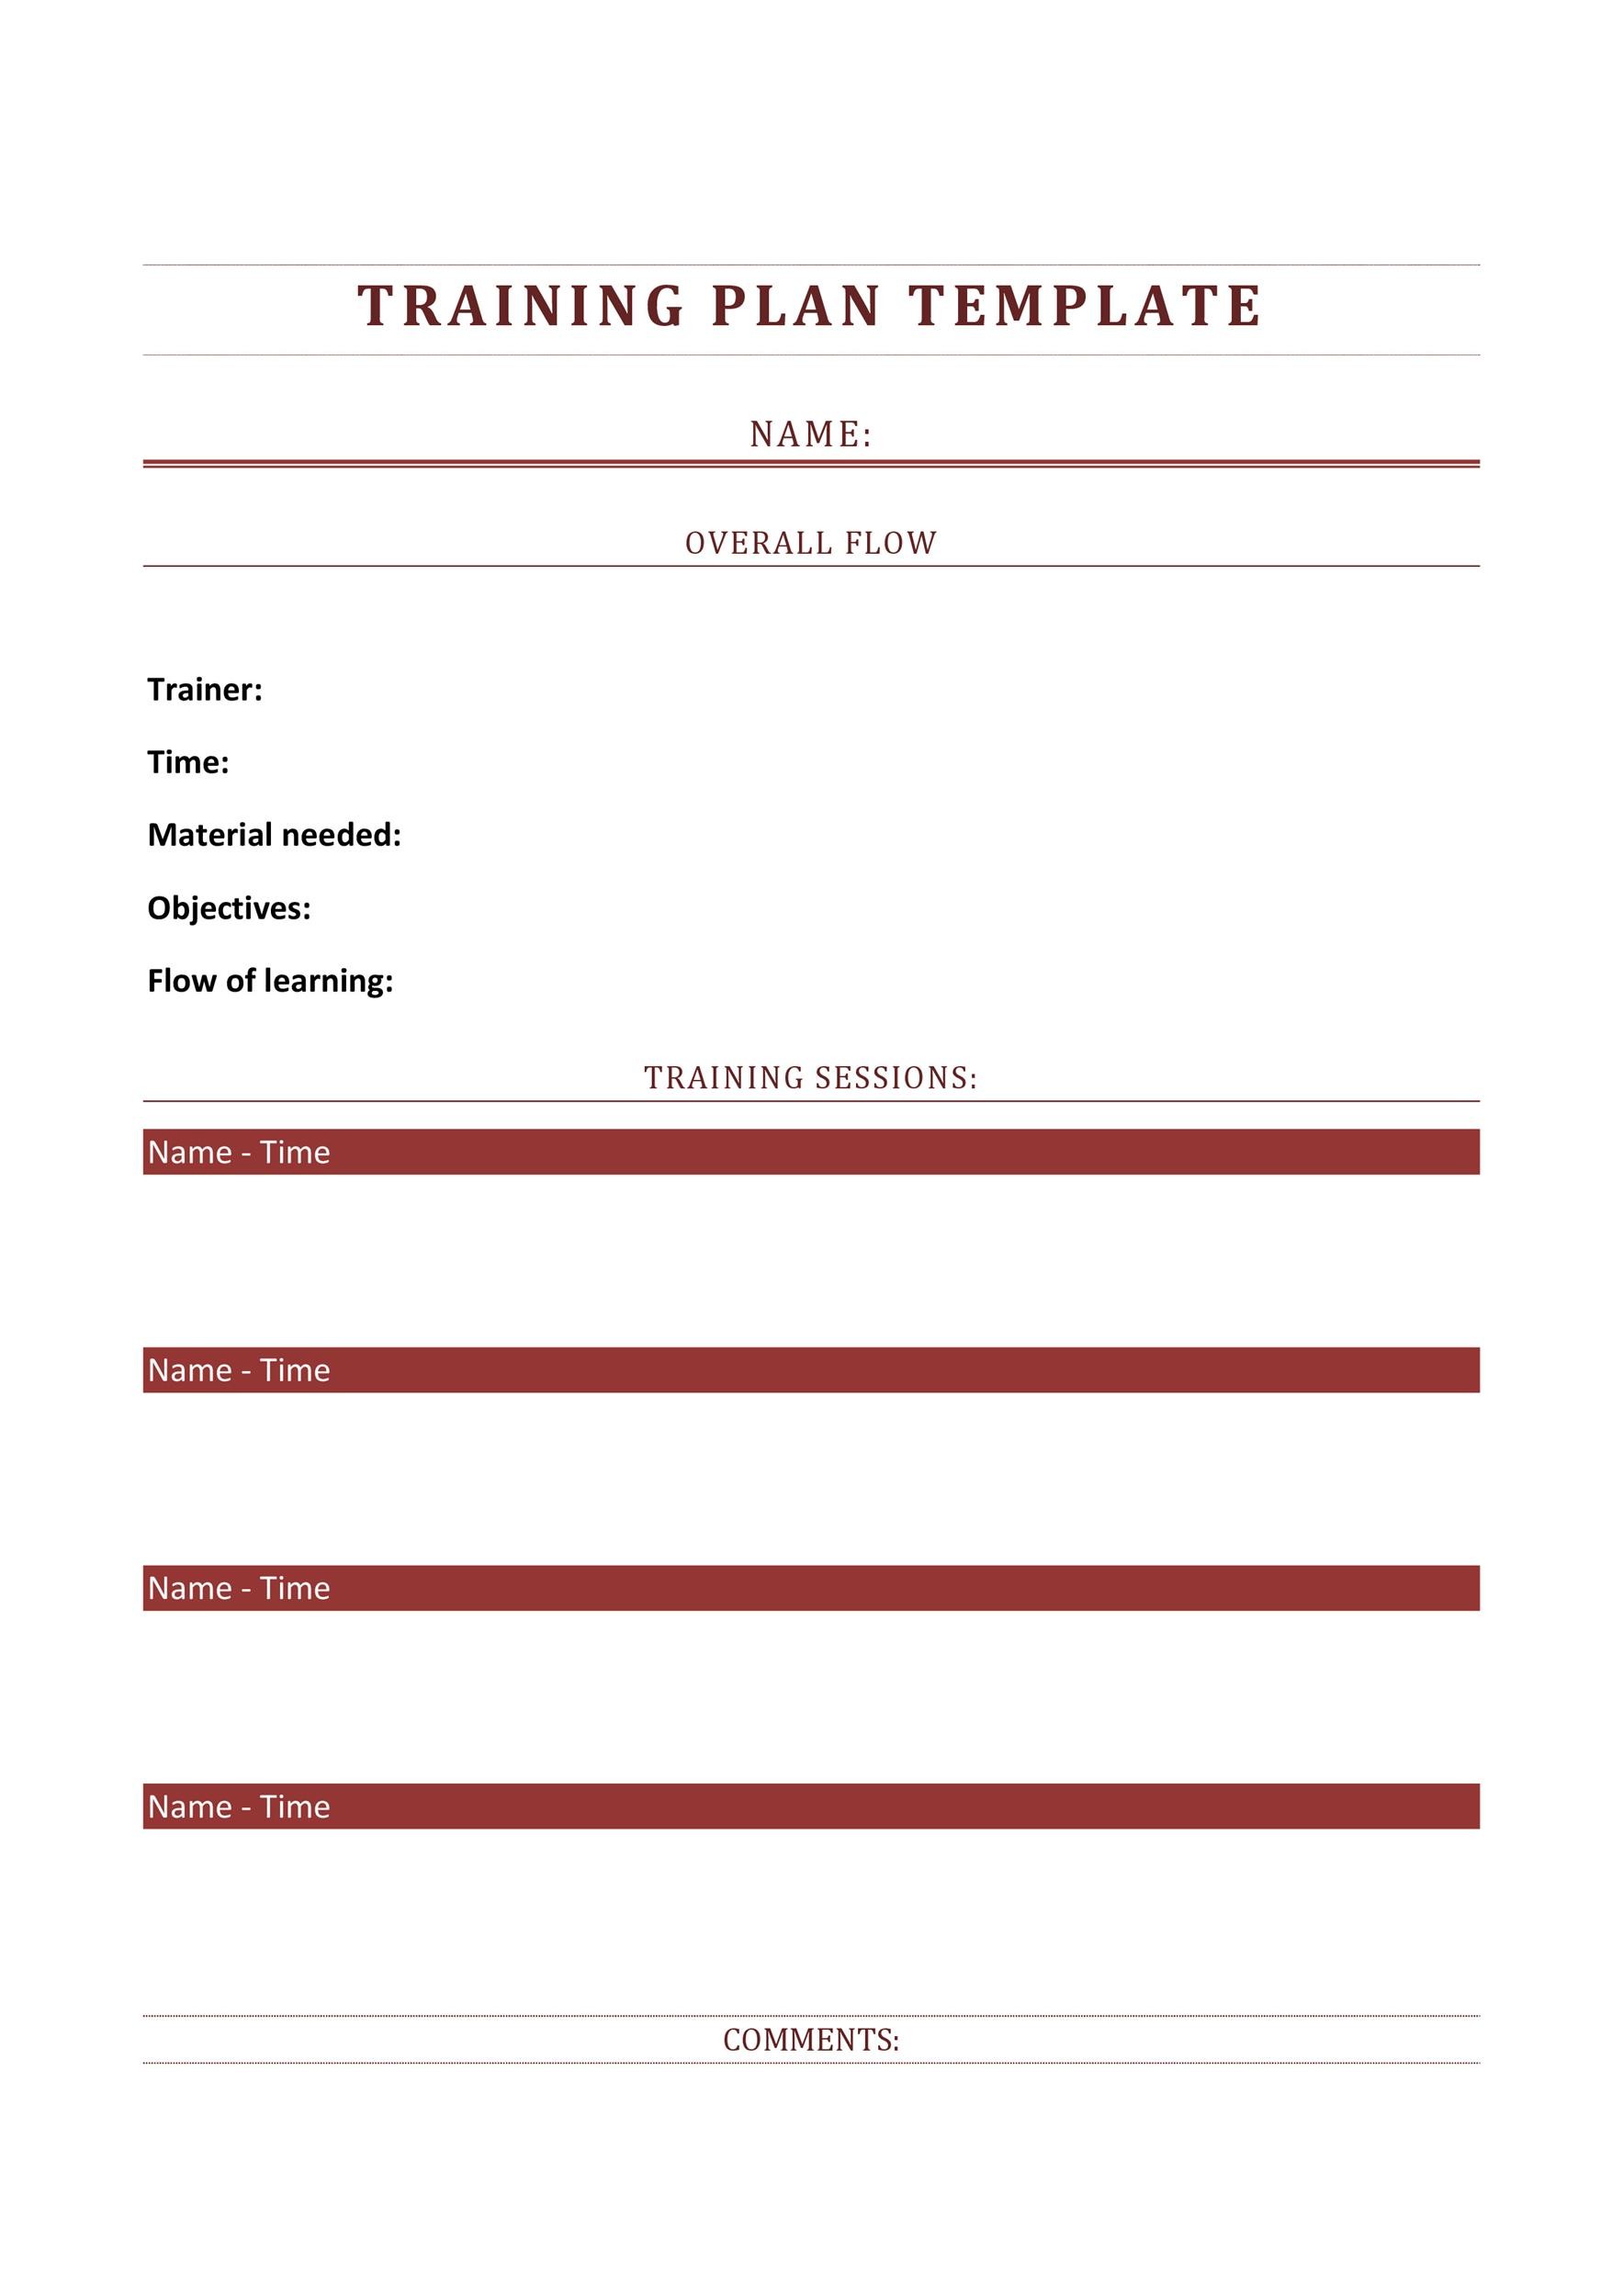 Training Document Template from templatelab.com